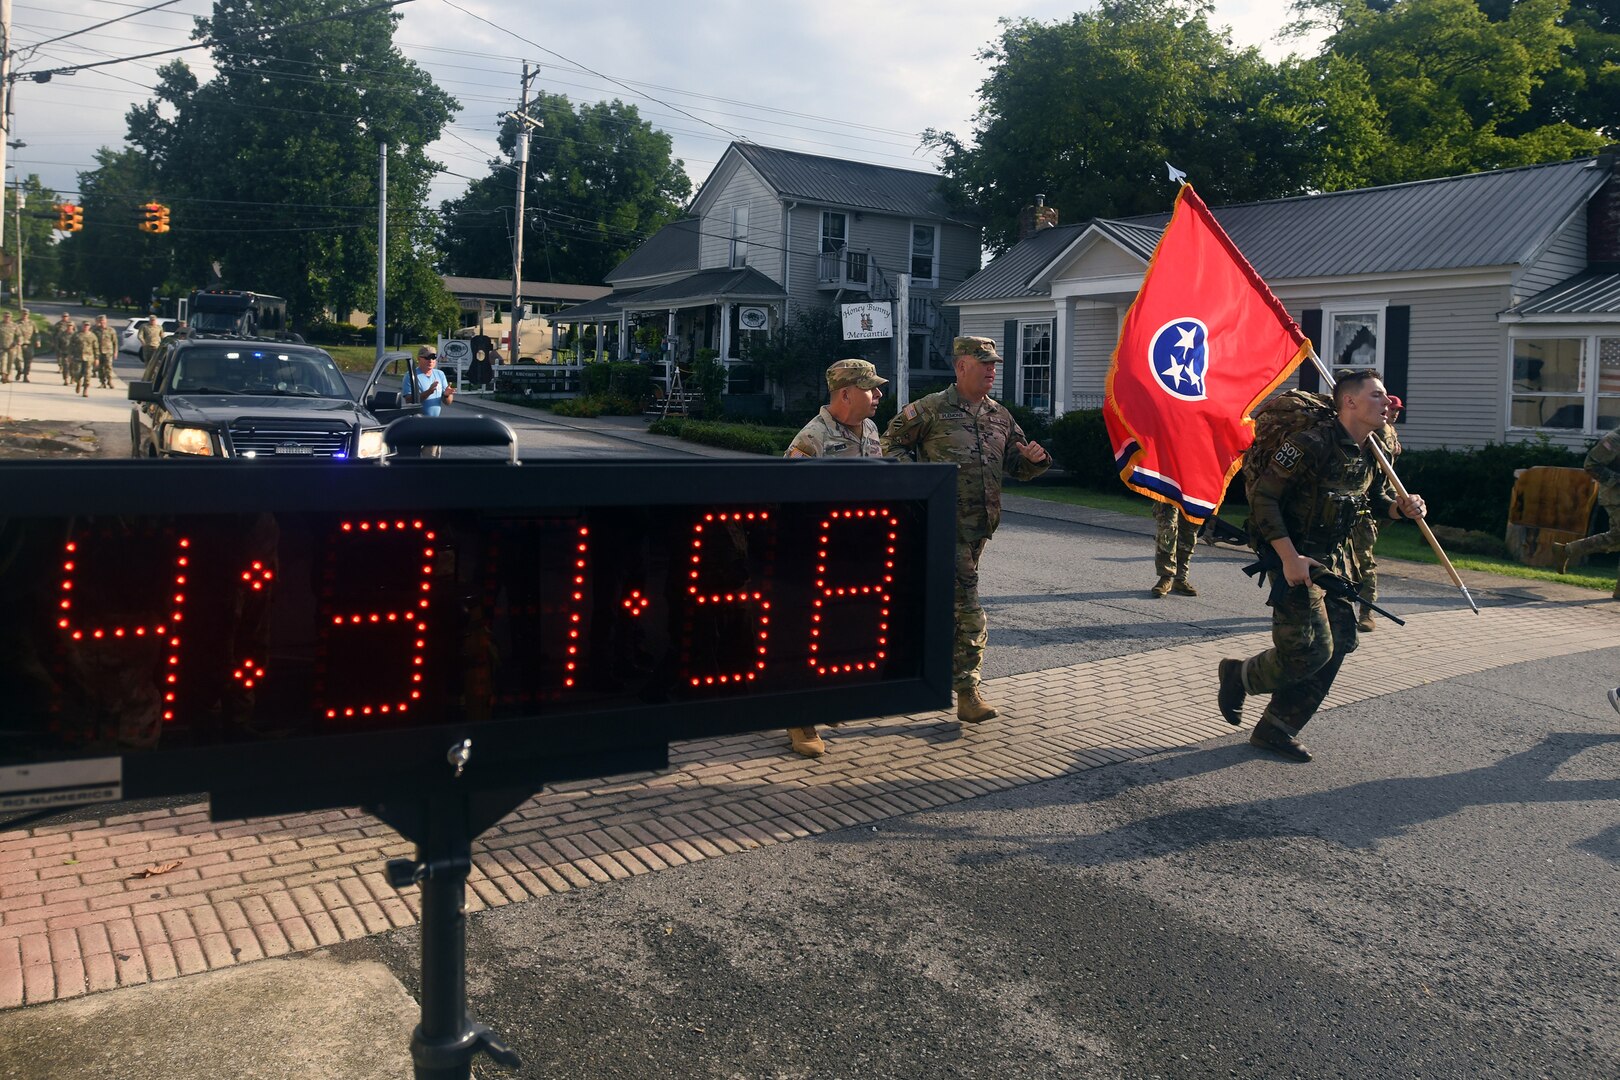 Spc. Grayson Vaughn, a military policeman with the Tennessee Army National Guard’s 252nd Military Police Company, 117th Military Police Battalion, 194th Engineer Brigade, crosses a finish line holding his state’s flag after completing a 16-mile ruck march – the last event of the 2022 Army National Guard Best Warrior Competition, July 29, 2022, in Lynchburg, Tennessee.